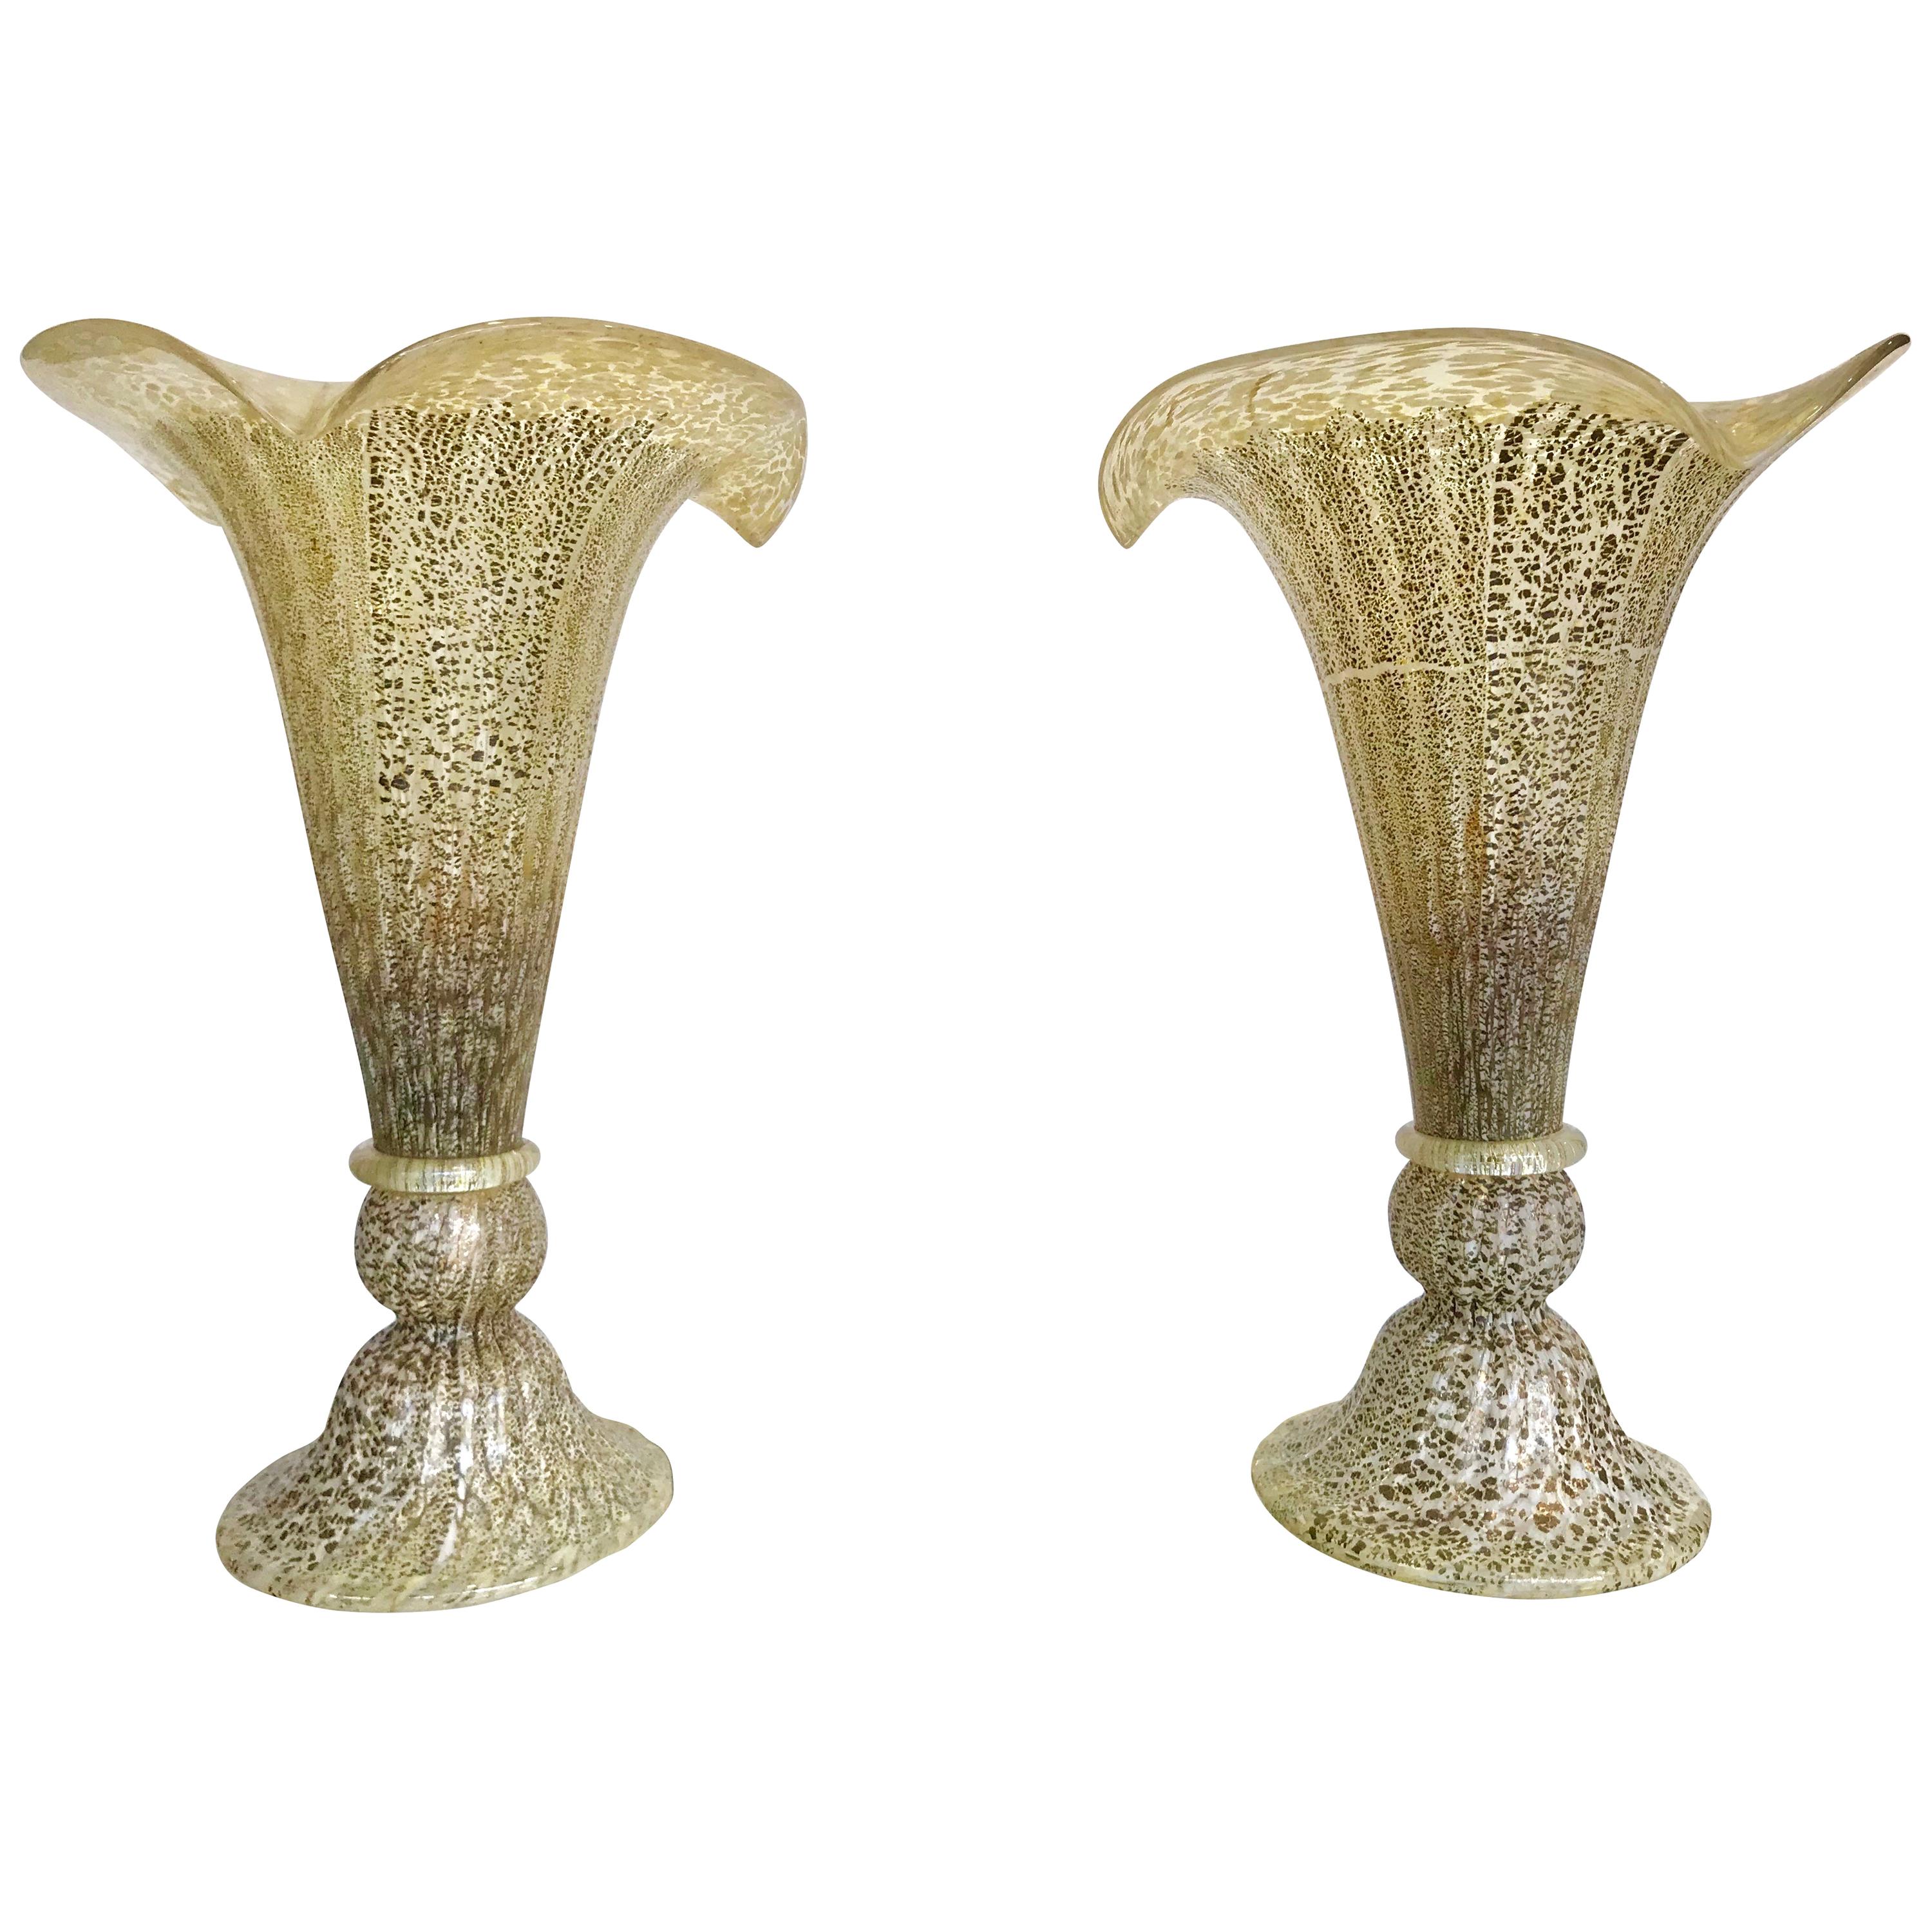 Lovely Pair of Murano Glass Fluted Lamps with Mottled Ribbed Finish